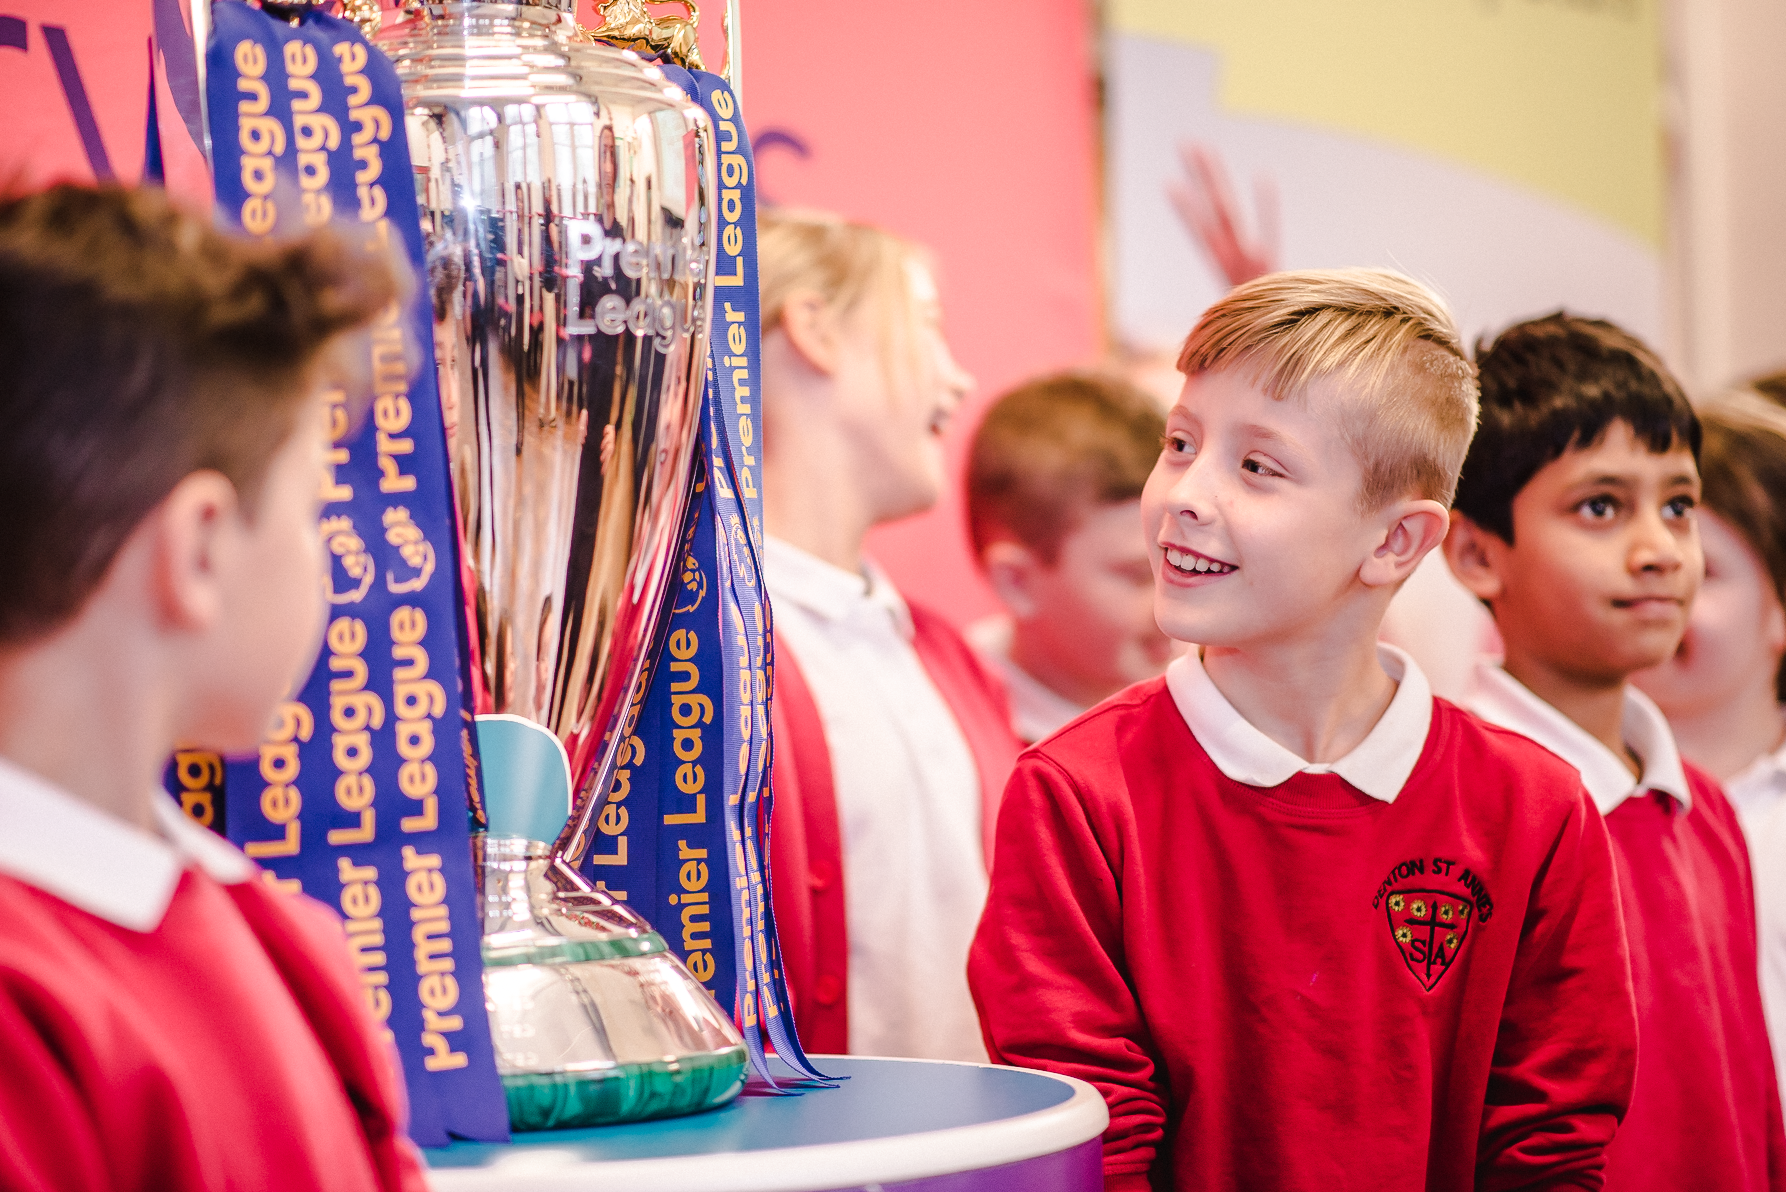 Premier League trophy at St Anthony's Catholic Primary School in Hull.